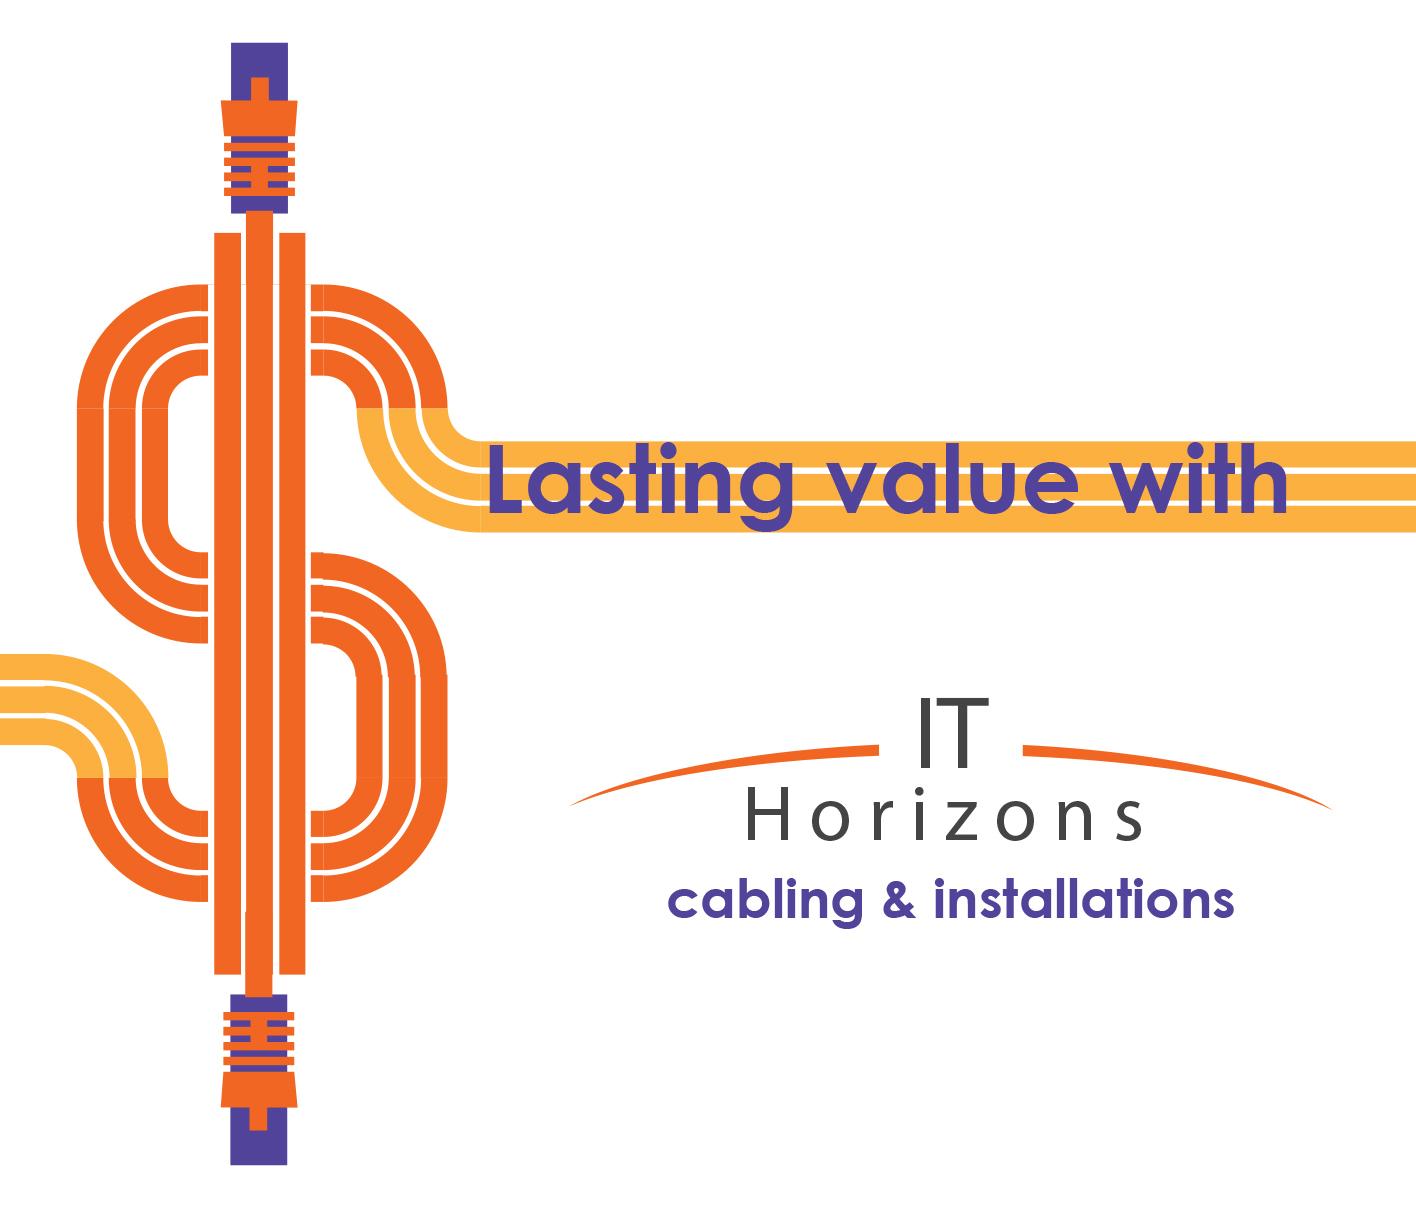 Planning Your Cabling & Physical Installations: The IT Horizons Difference